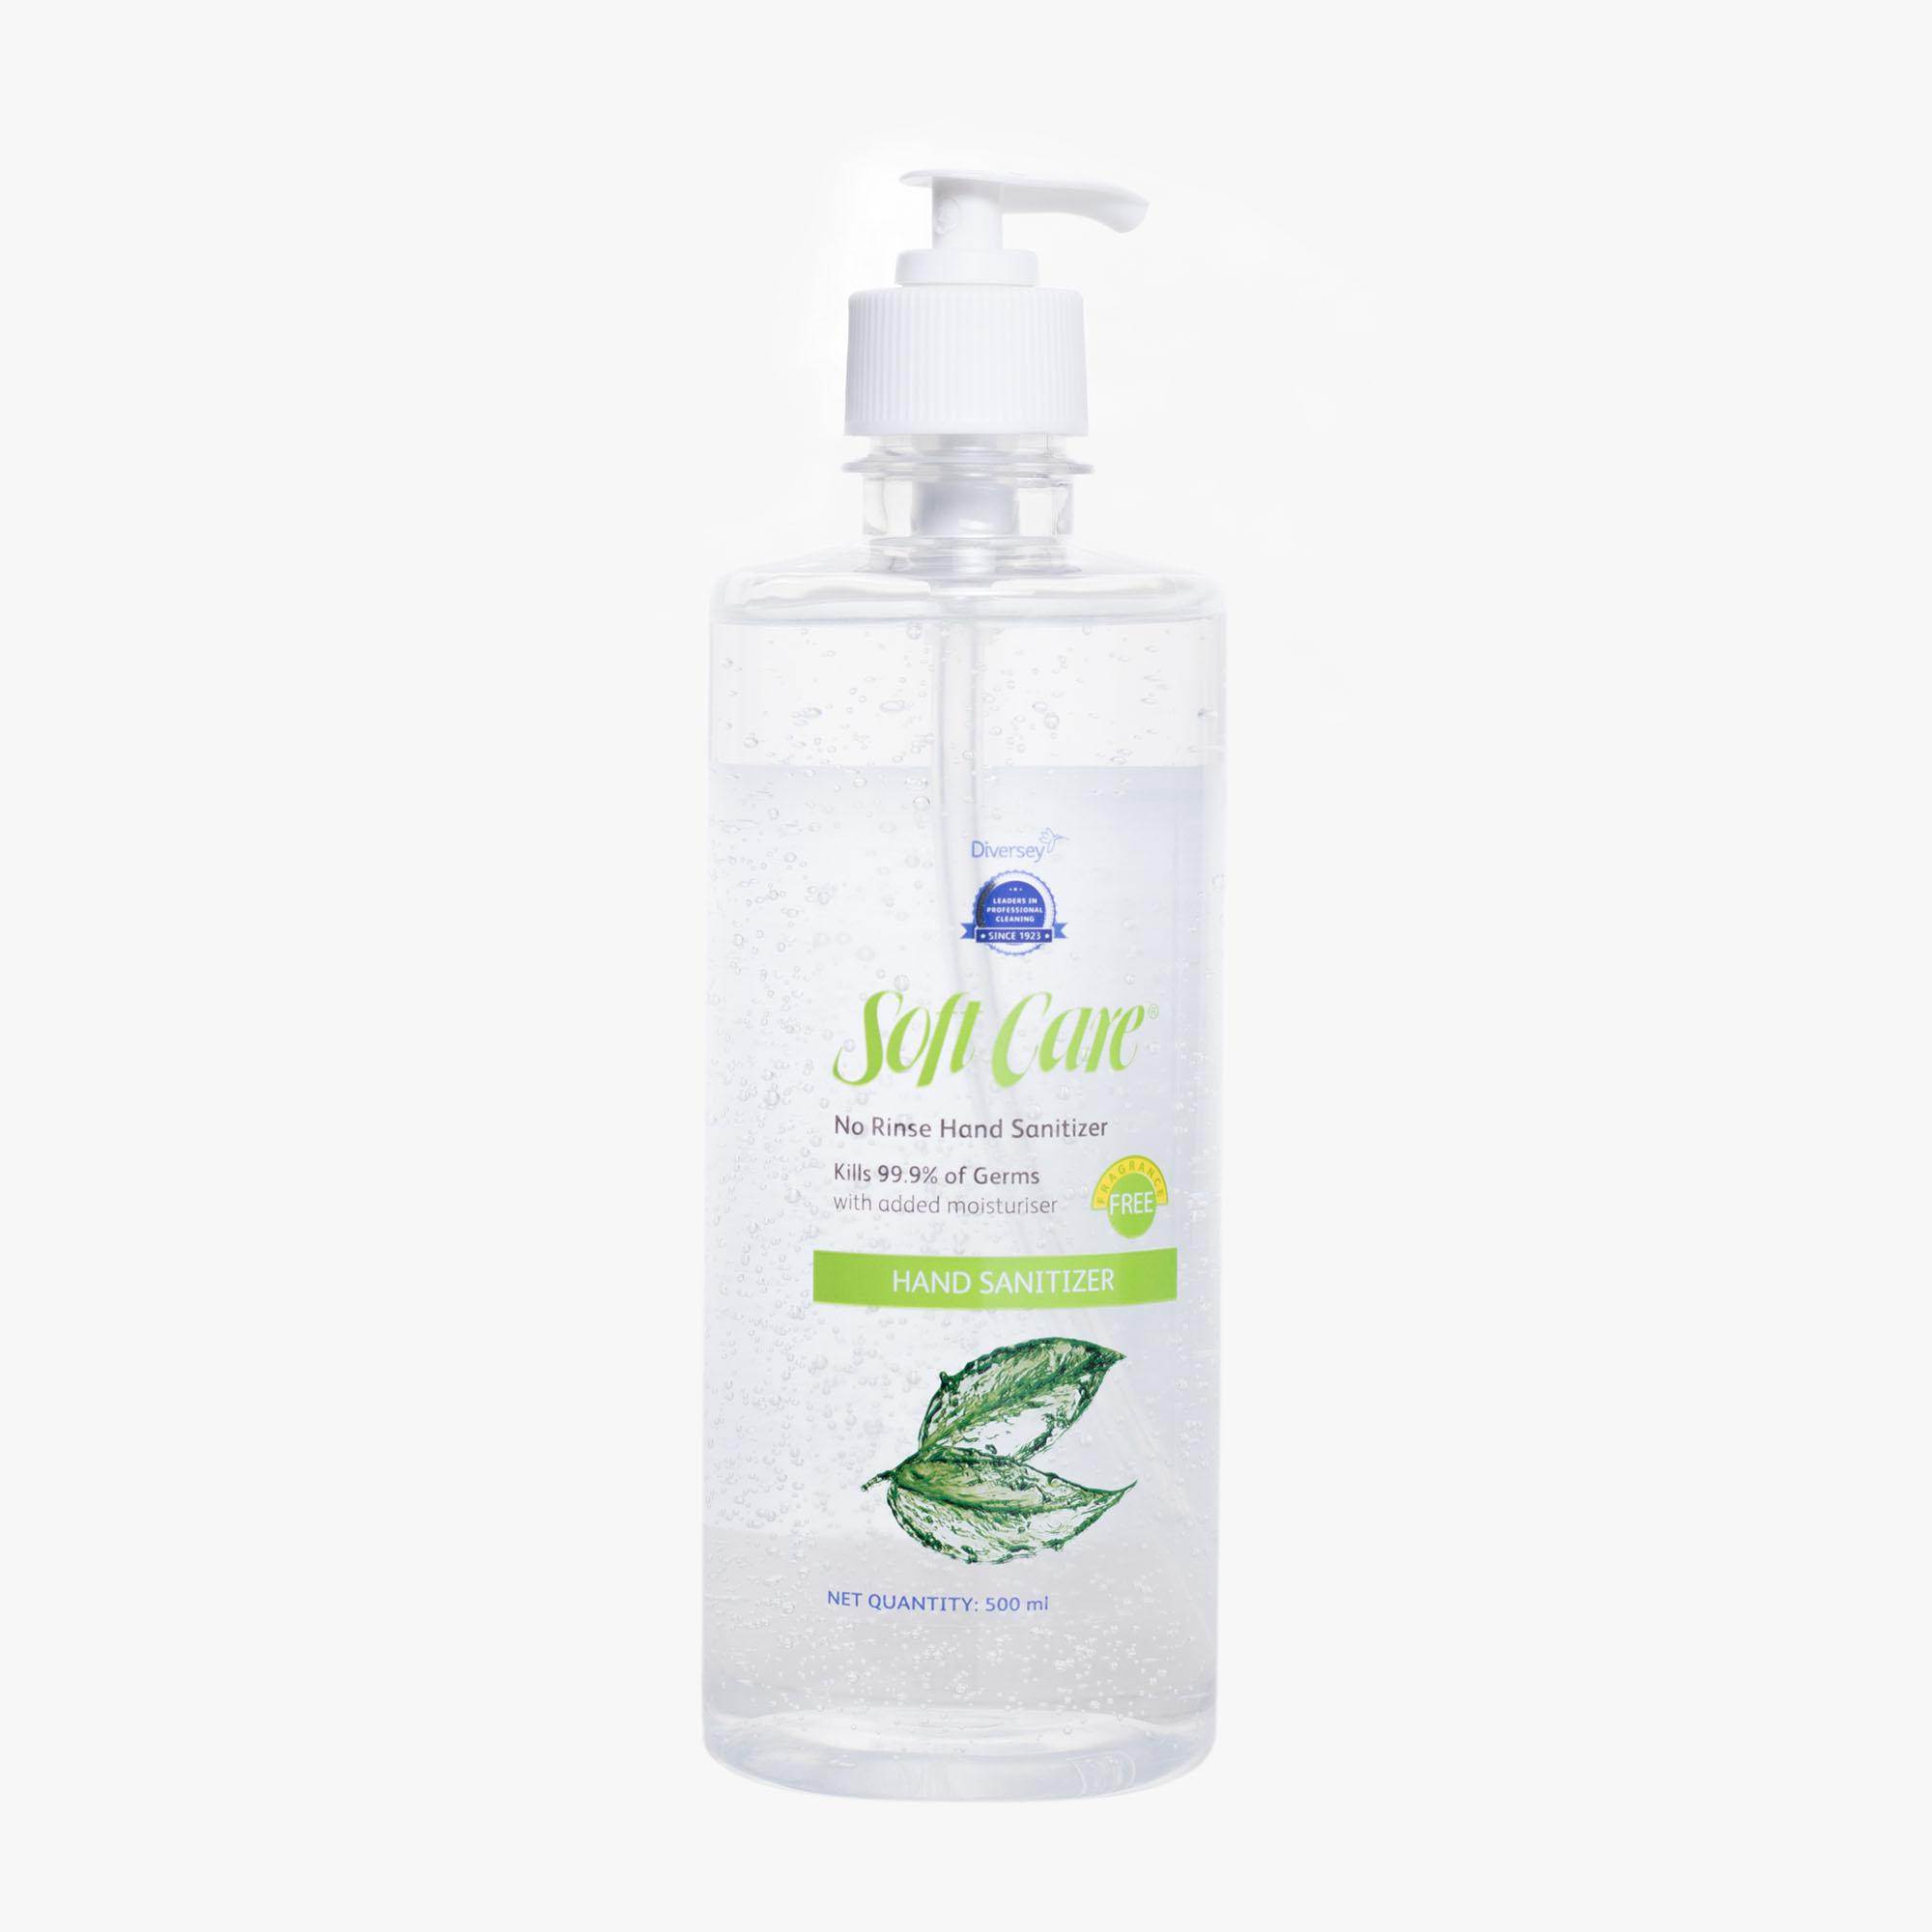 Softcare%20No%20rinse%20hand%20sanitizer%20%28Front%292000x2000.jpg